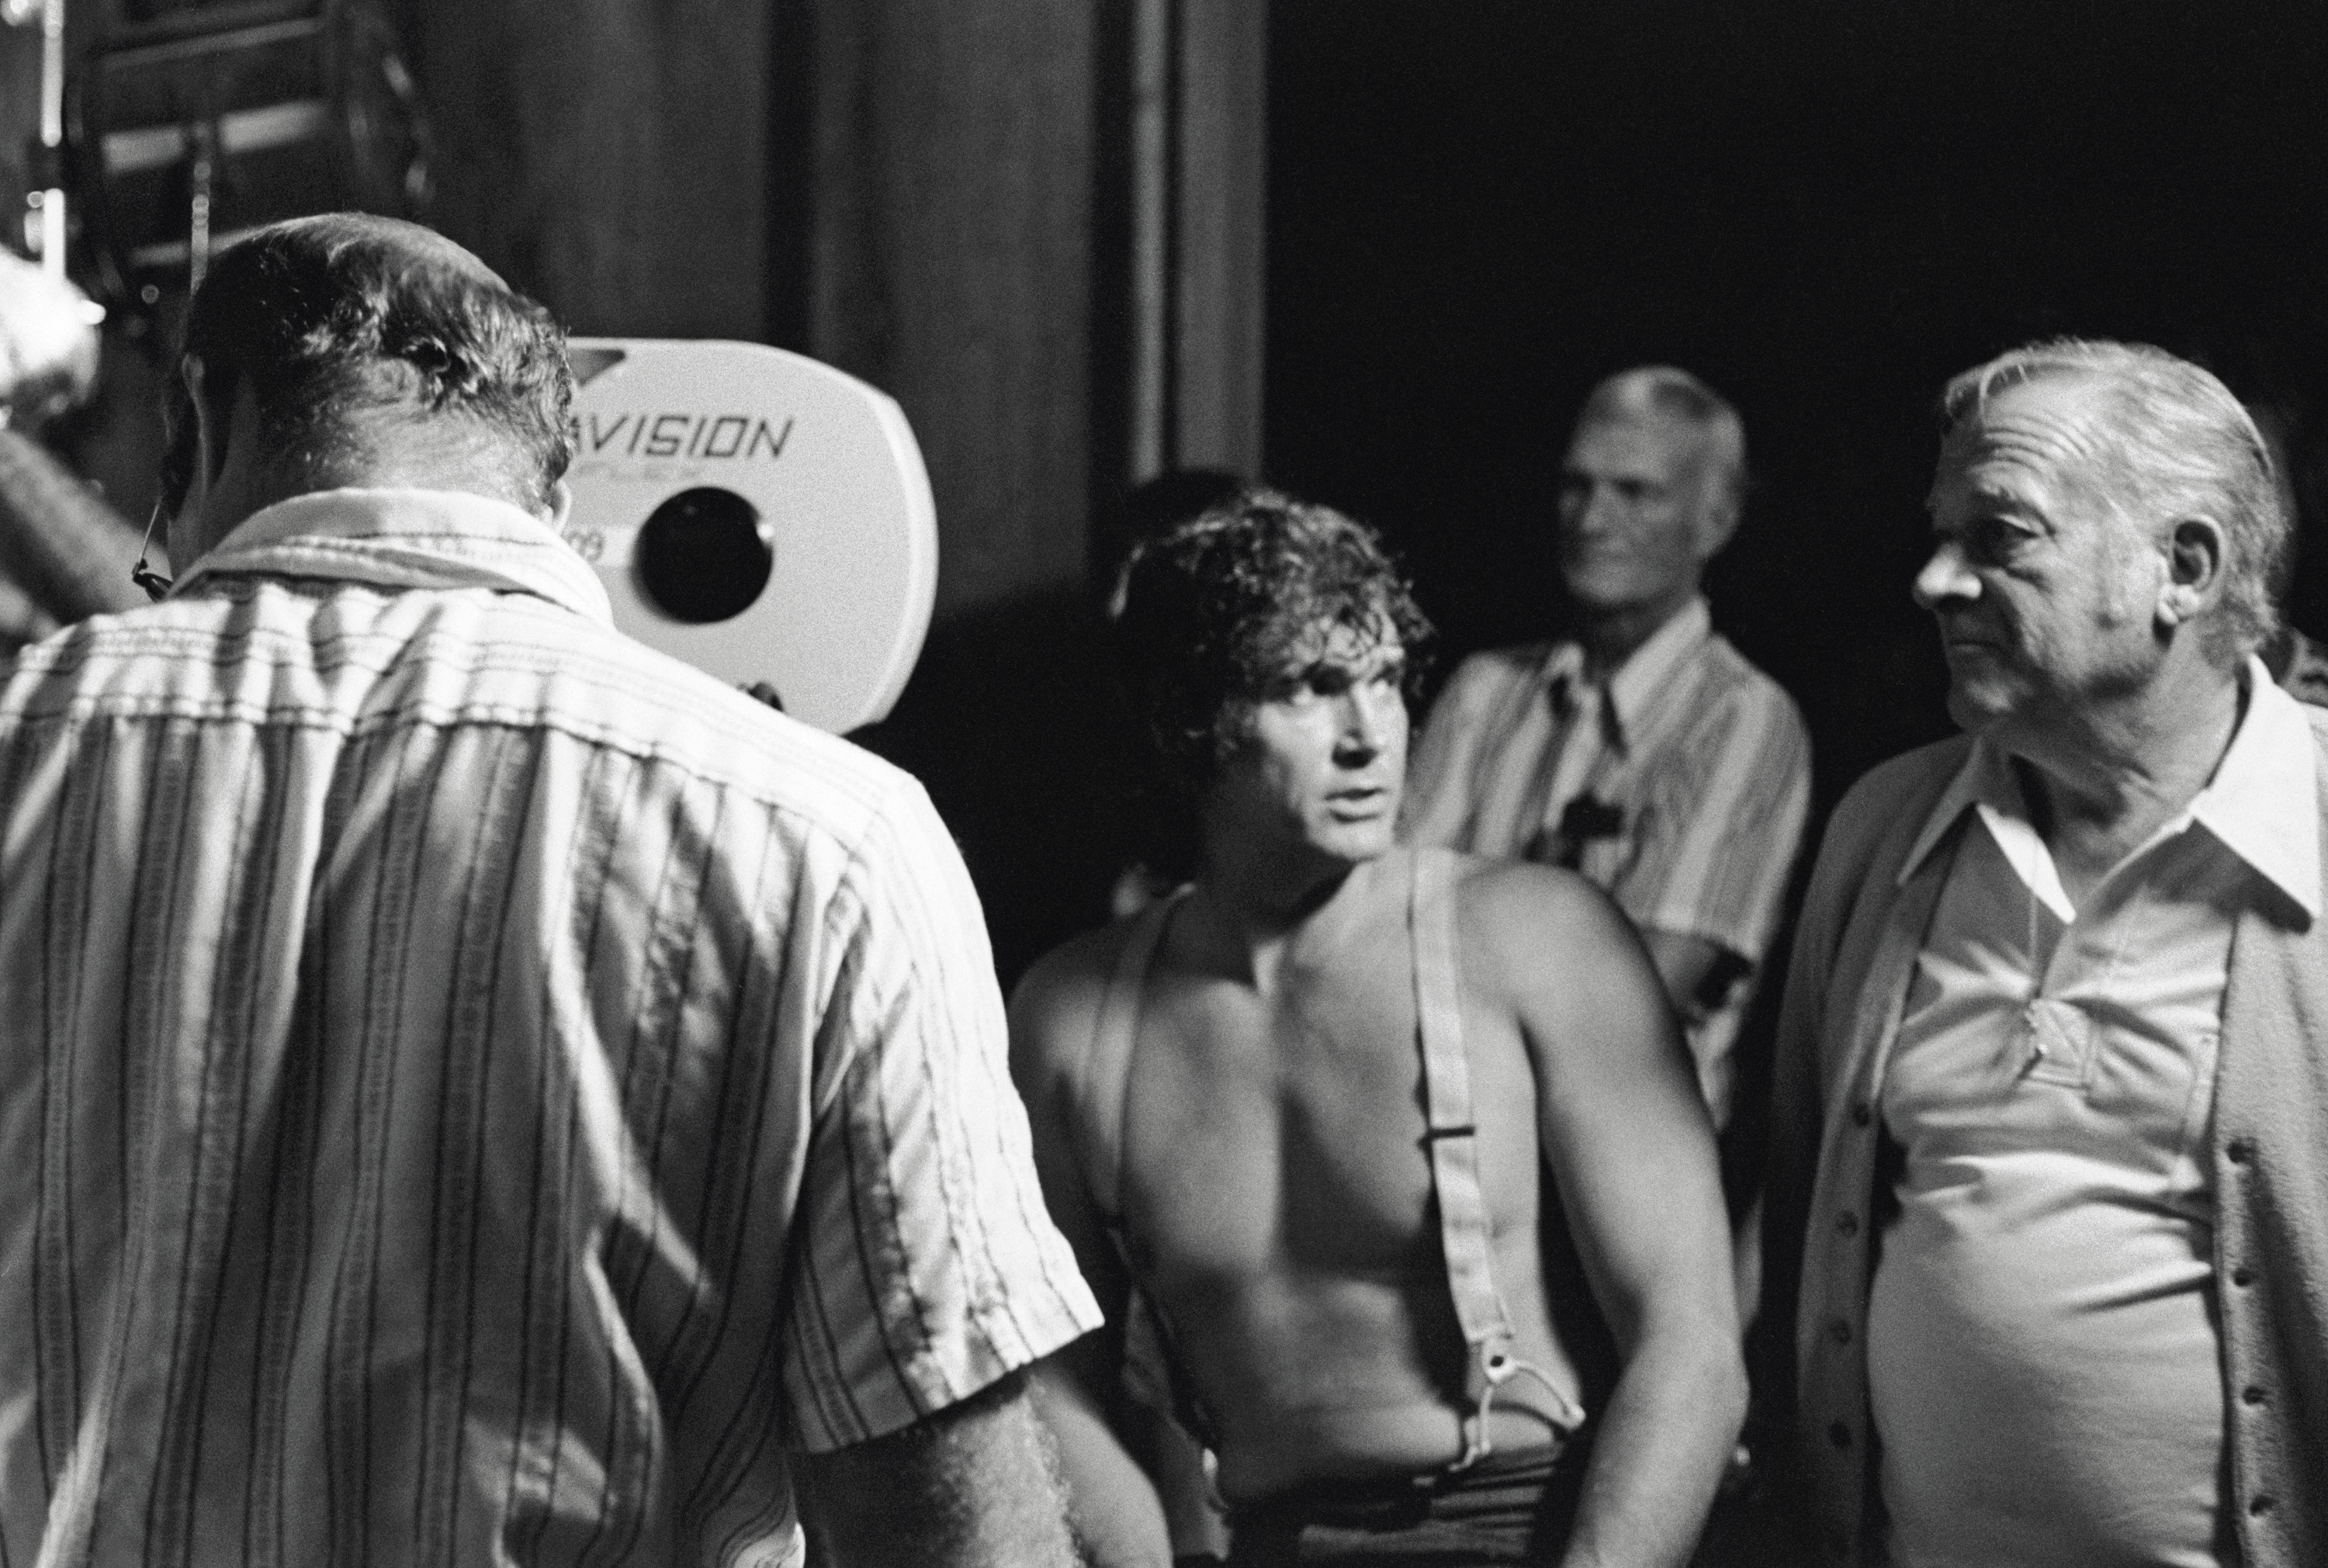 Michael Landon | NBCU Photo Bank/NBCUniversal via Getty Images via Getty Images